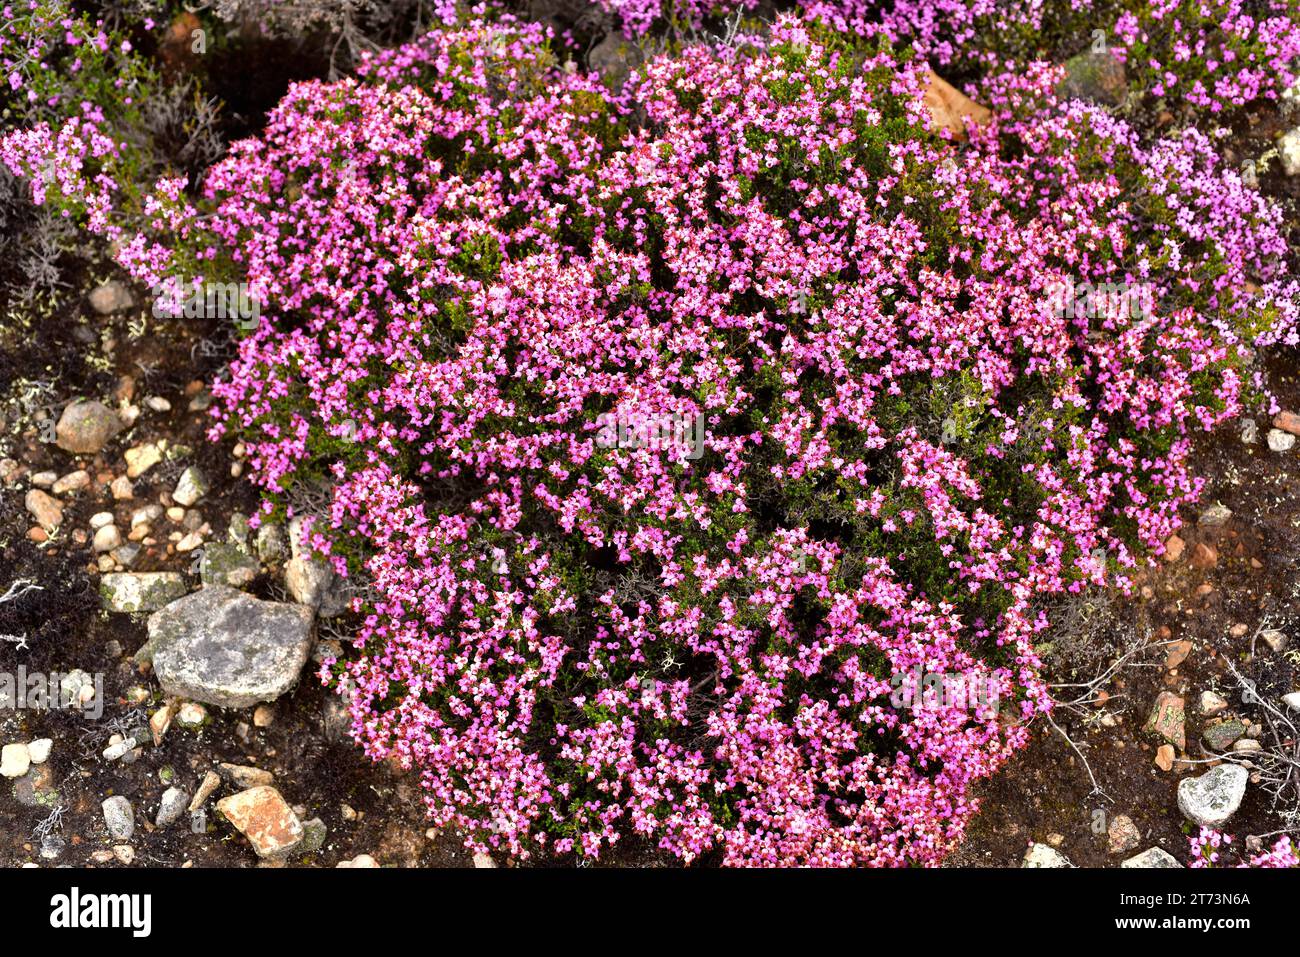 Spanish heath (Erica australis) is a shrub endemic to western Iberian Peninsula and northern Morocco. This photo was taken in northern Leon, Castilla Stock Photo